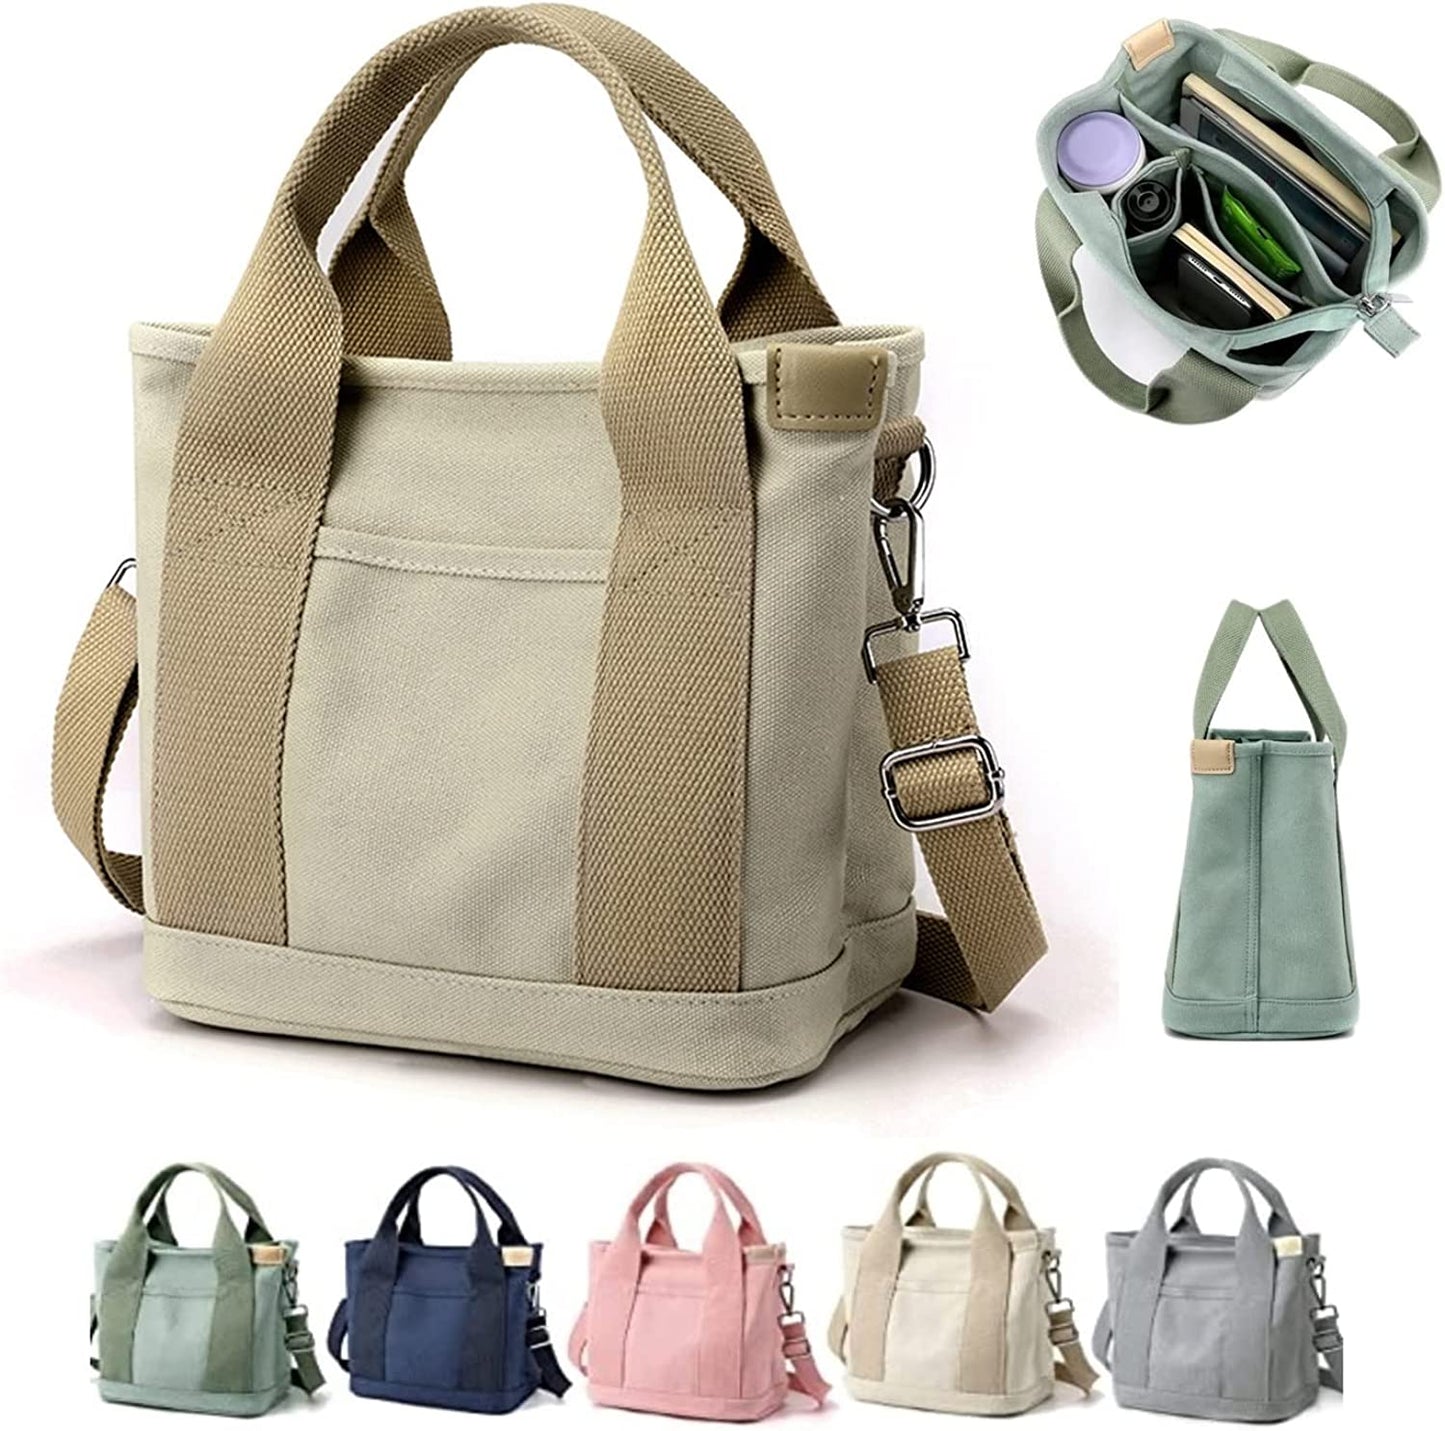 ♥️Women Simple Casual Canvas Tote Bag, Versatile Handbag For Travel and Work [2023 New Arrivals]